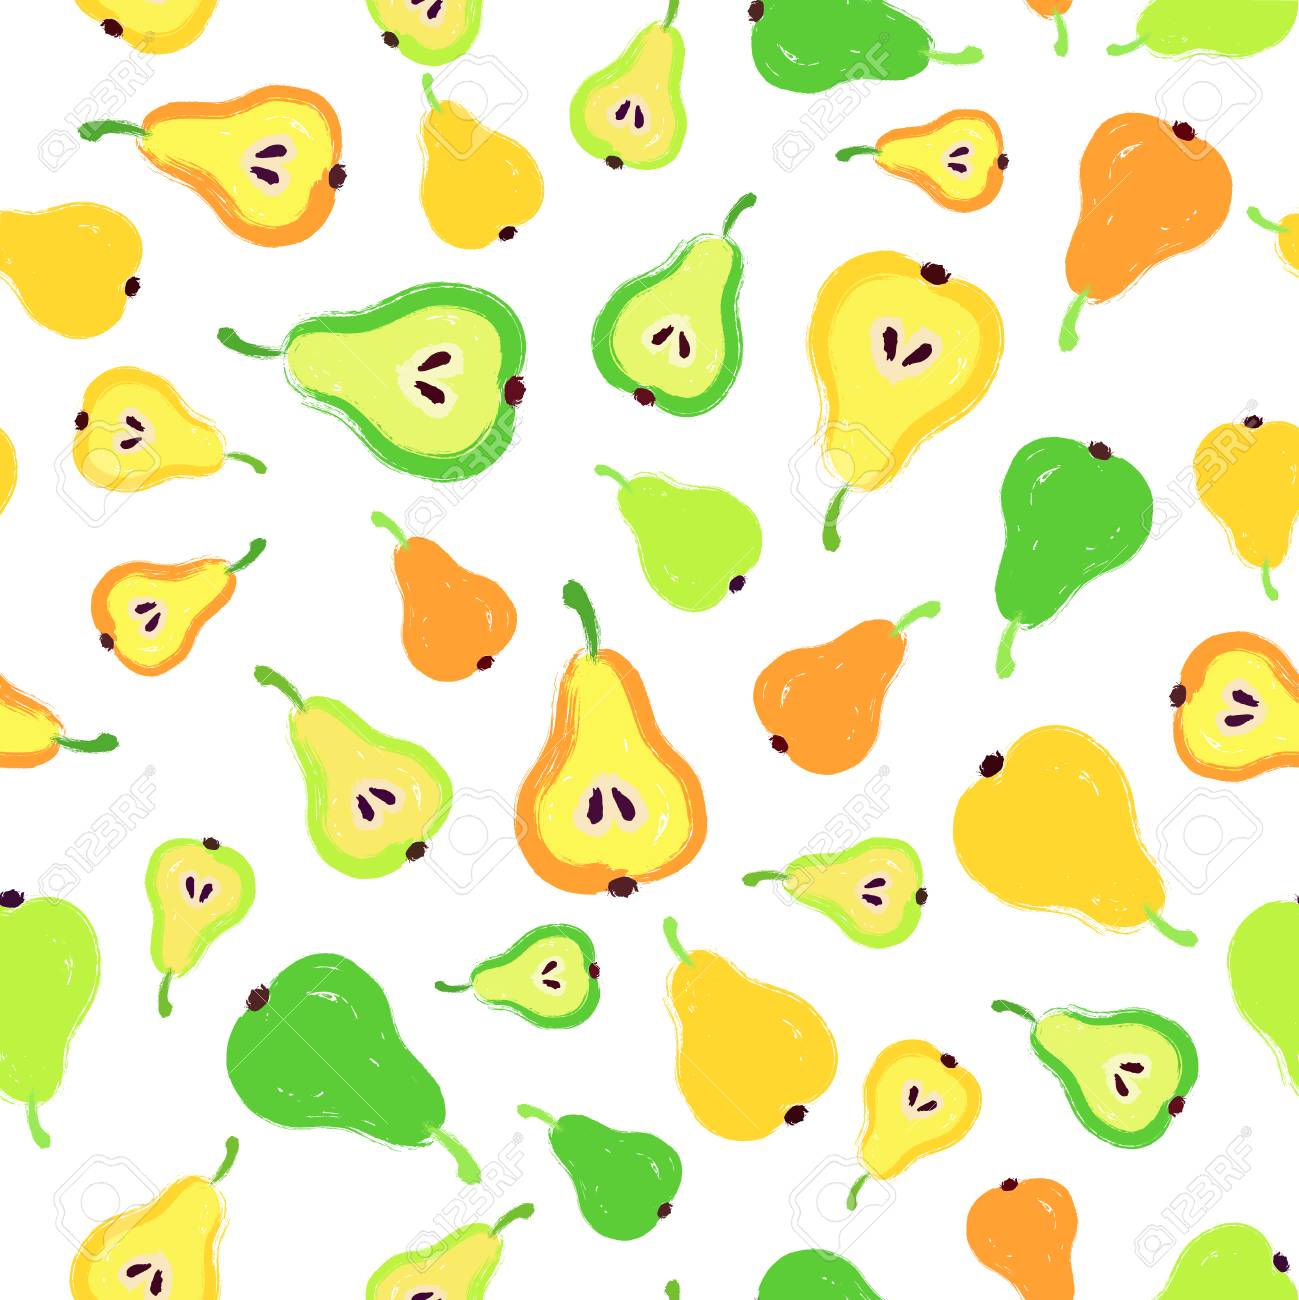 Pear Background Fruit Painted Pattern Seamless Chaotic